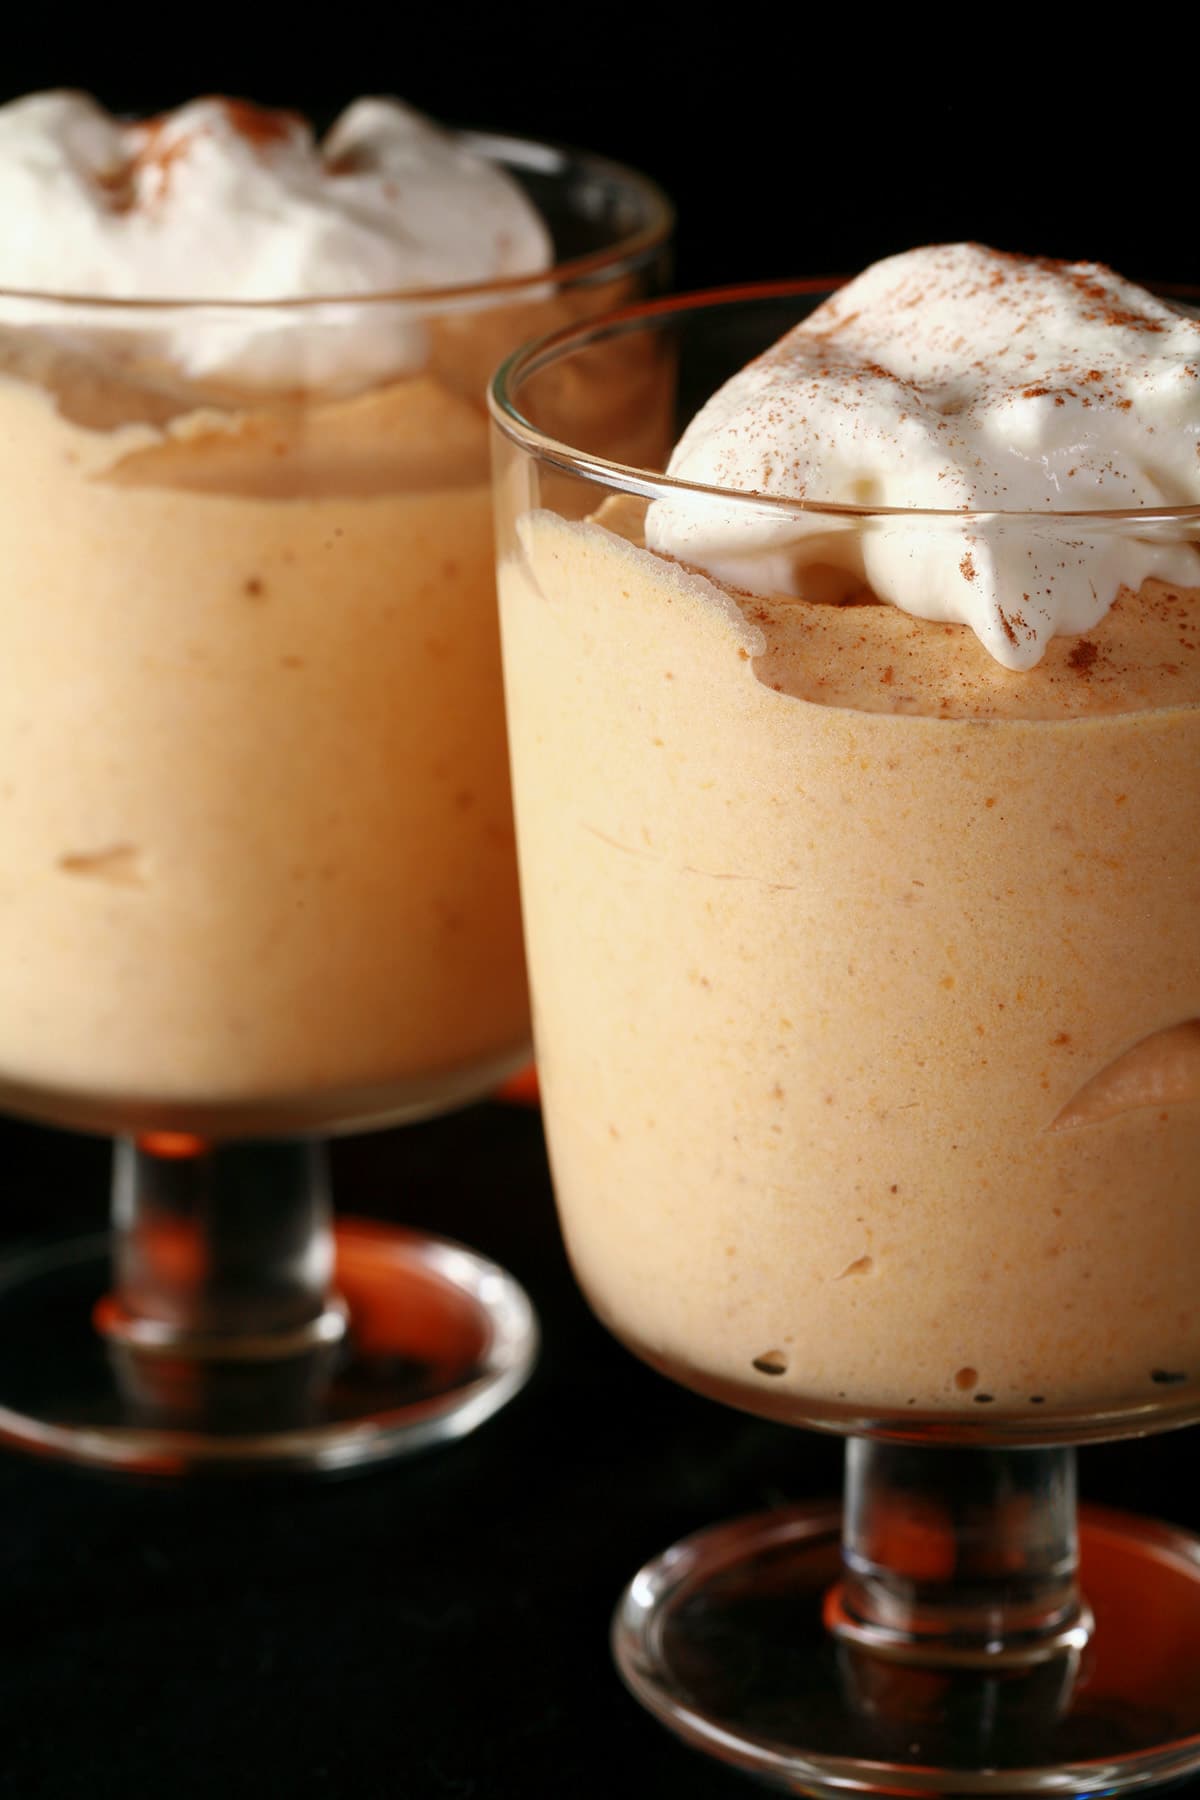 Two glasses with traditional pumpkin mousse in them. They are topped with whipped cream and a sprinkle of cinnamon.